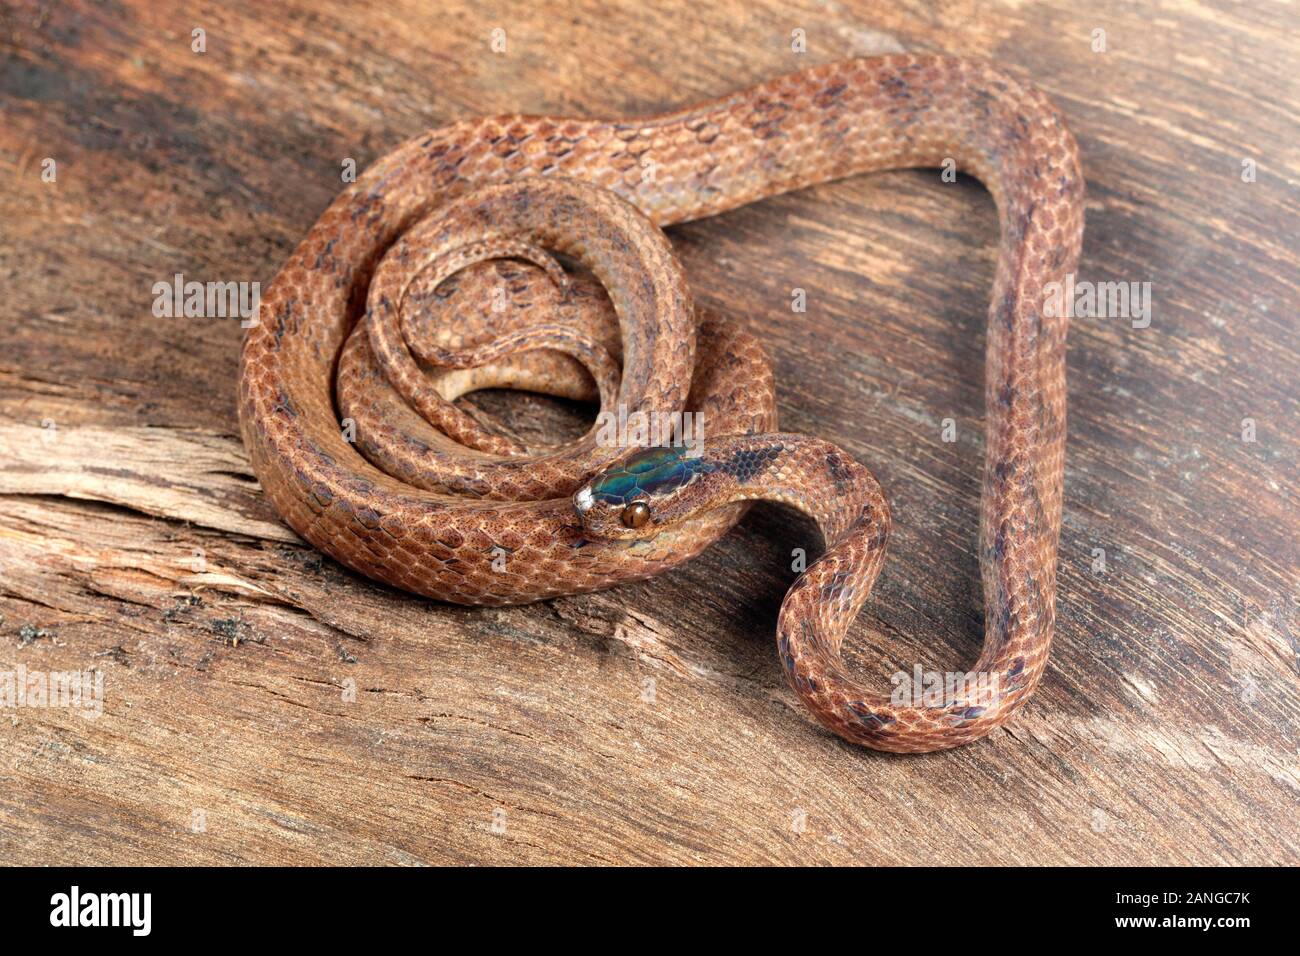 The common slug snake, Pareas monticola, is a species of snake found in Northeast India Stock Photo